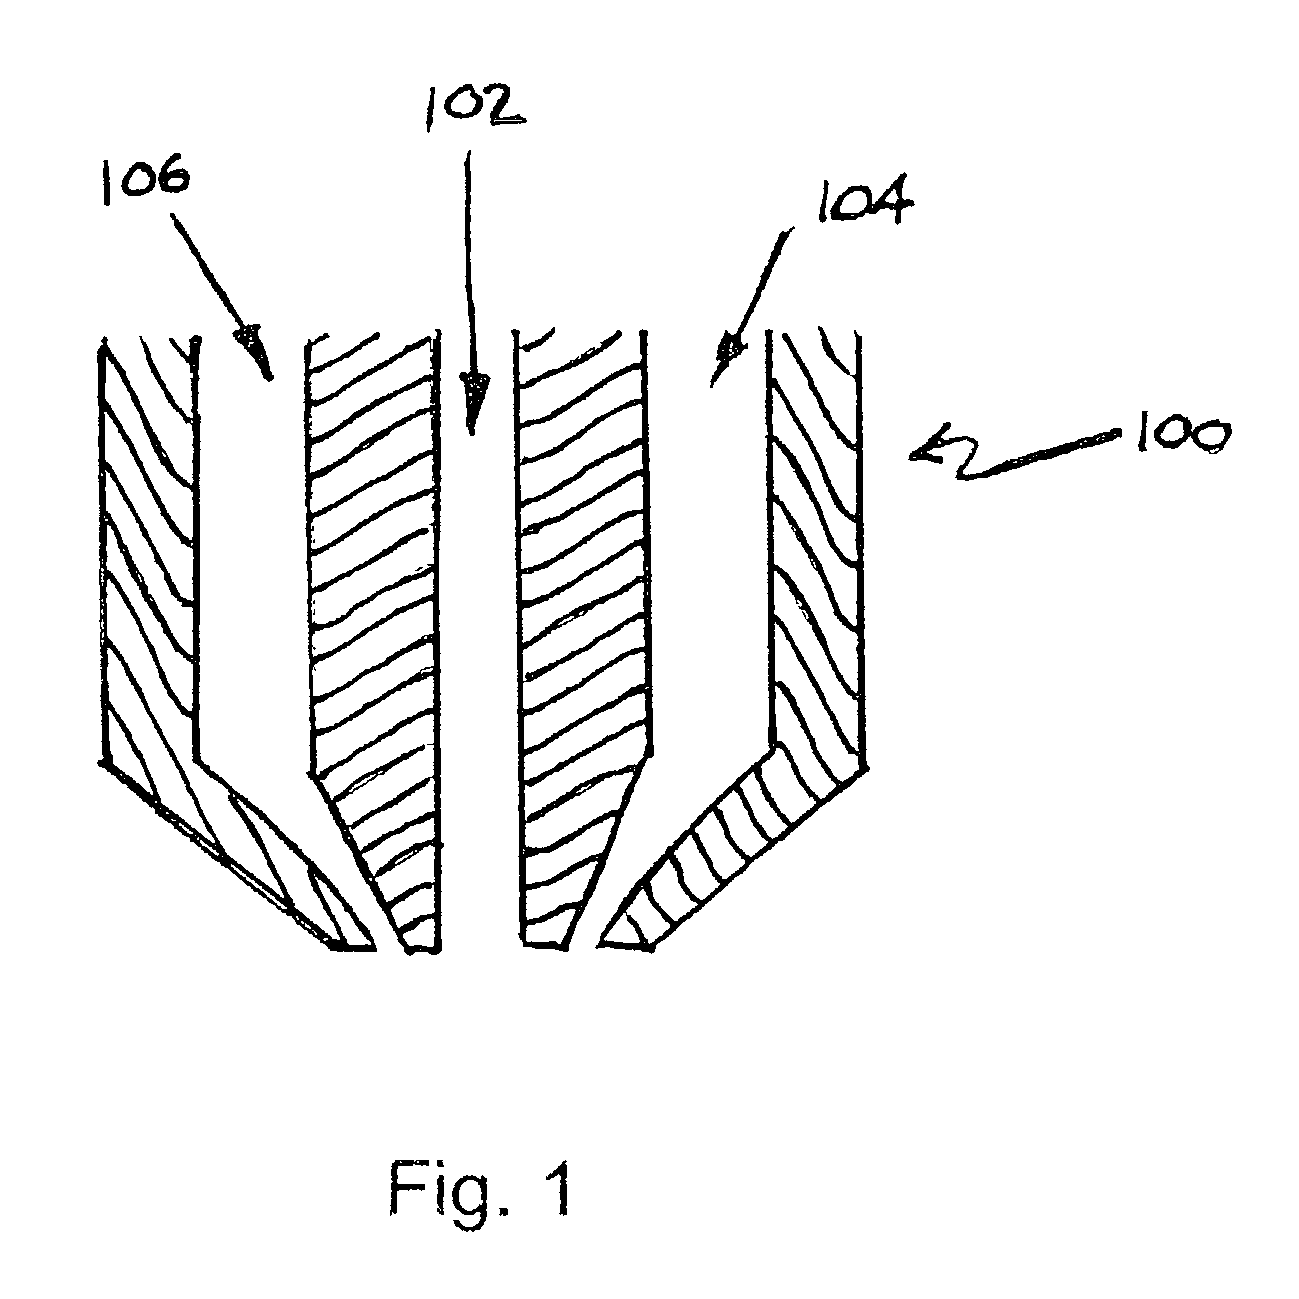 Metal-air battery components and methods for making same